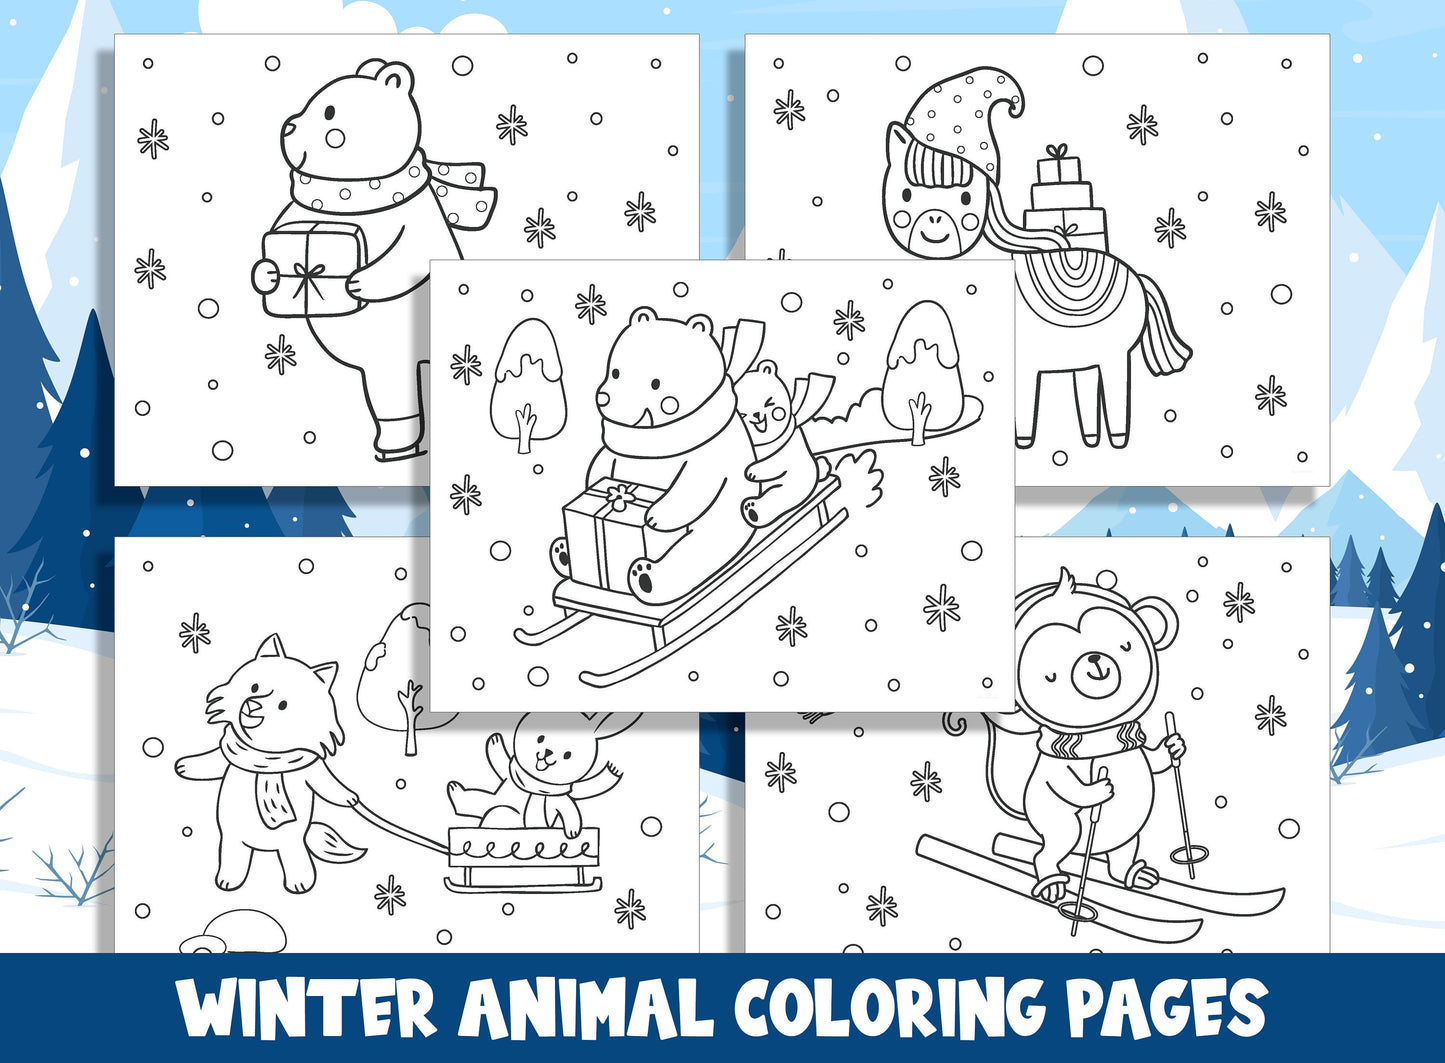 Arctic Adventures: 20 Playful Winter Animal Coloring Pages for Kids, PDF File, Instant Download